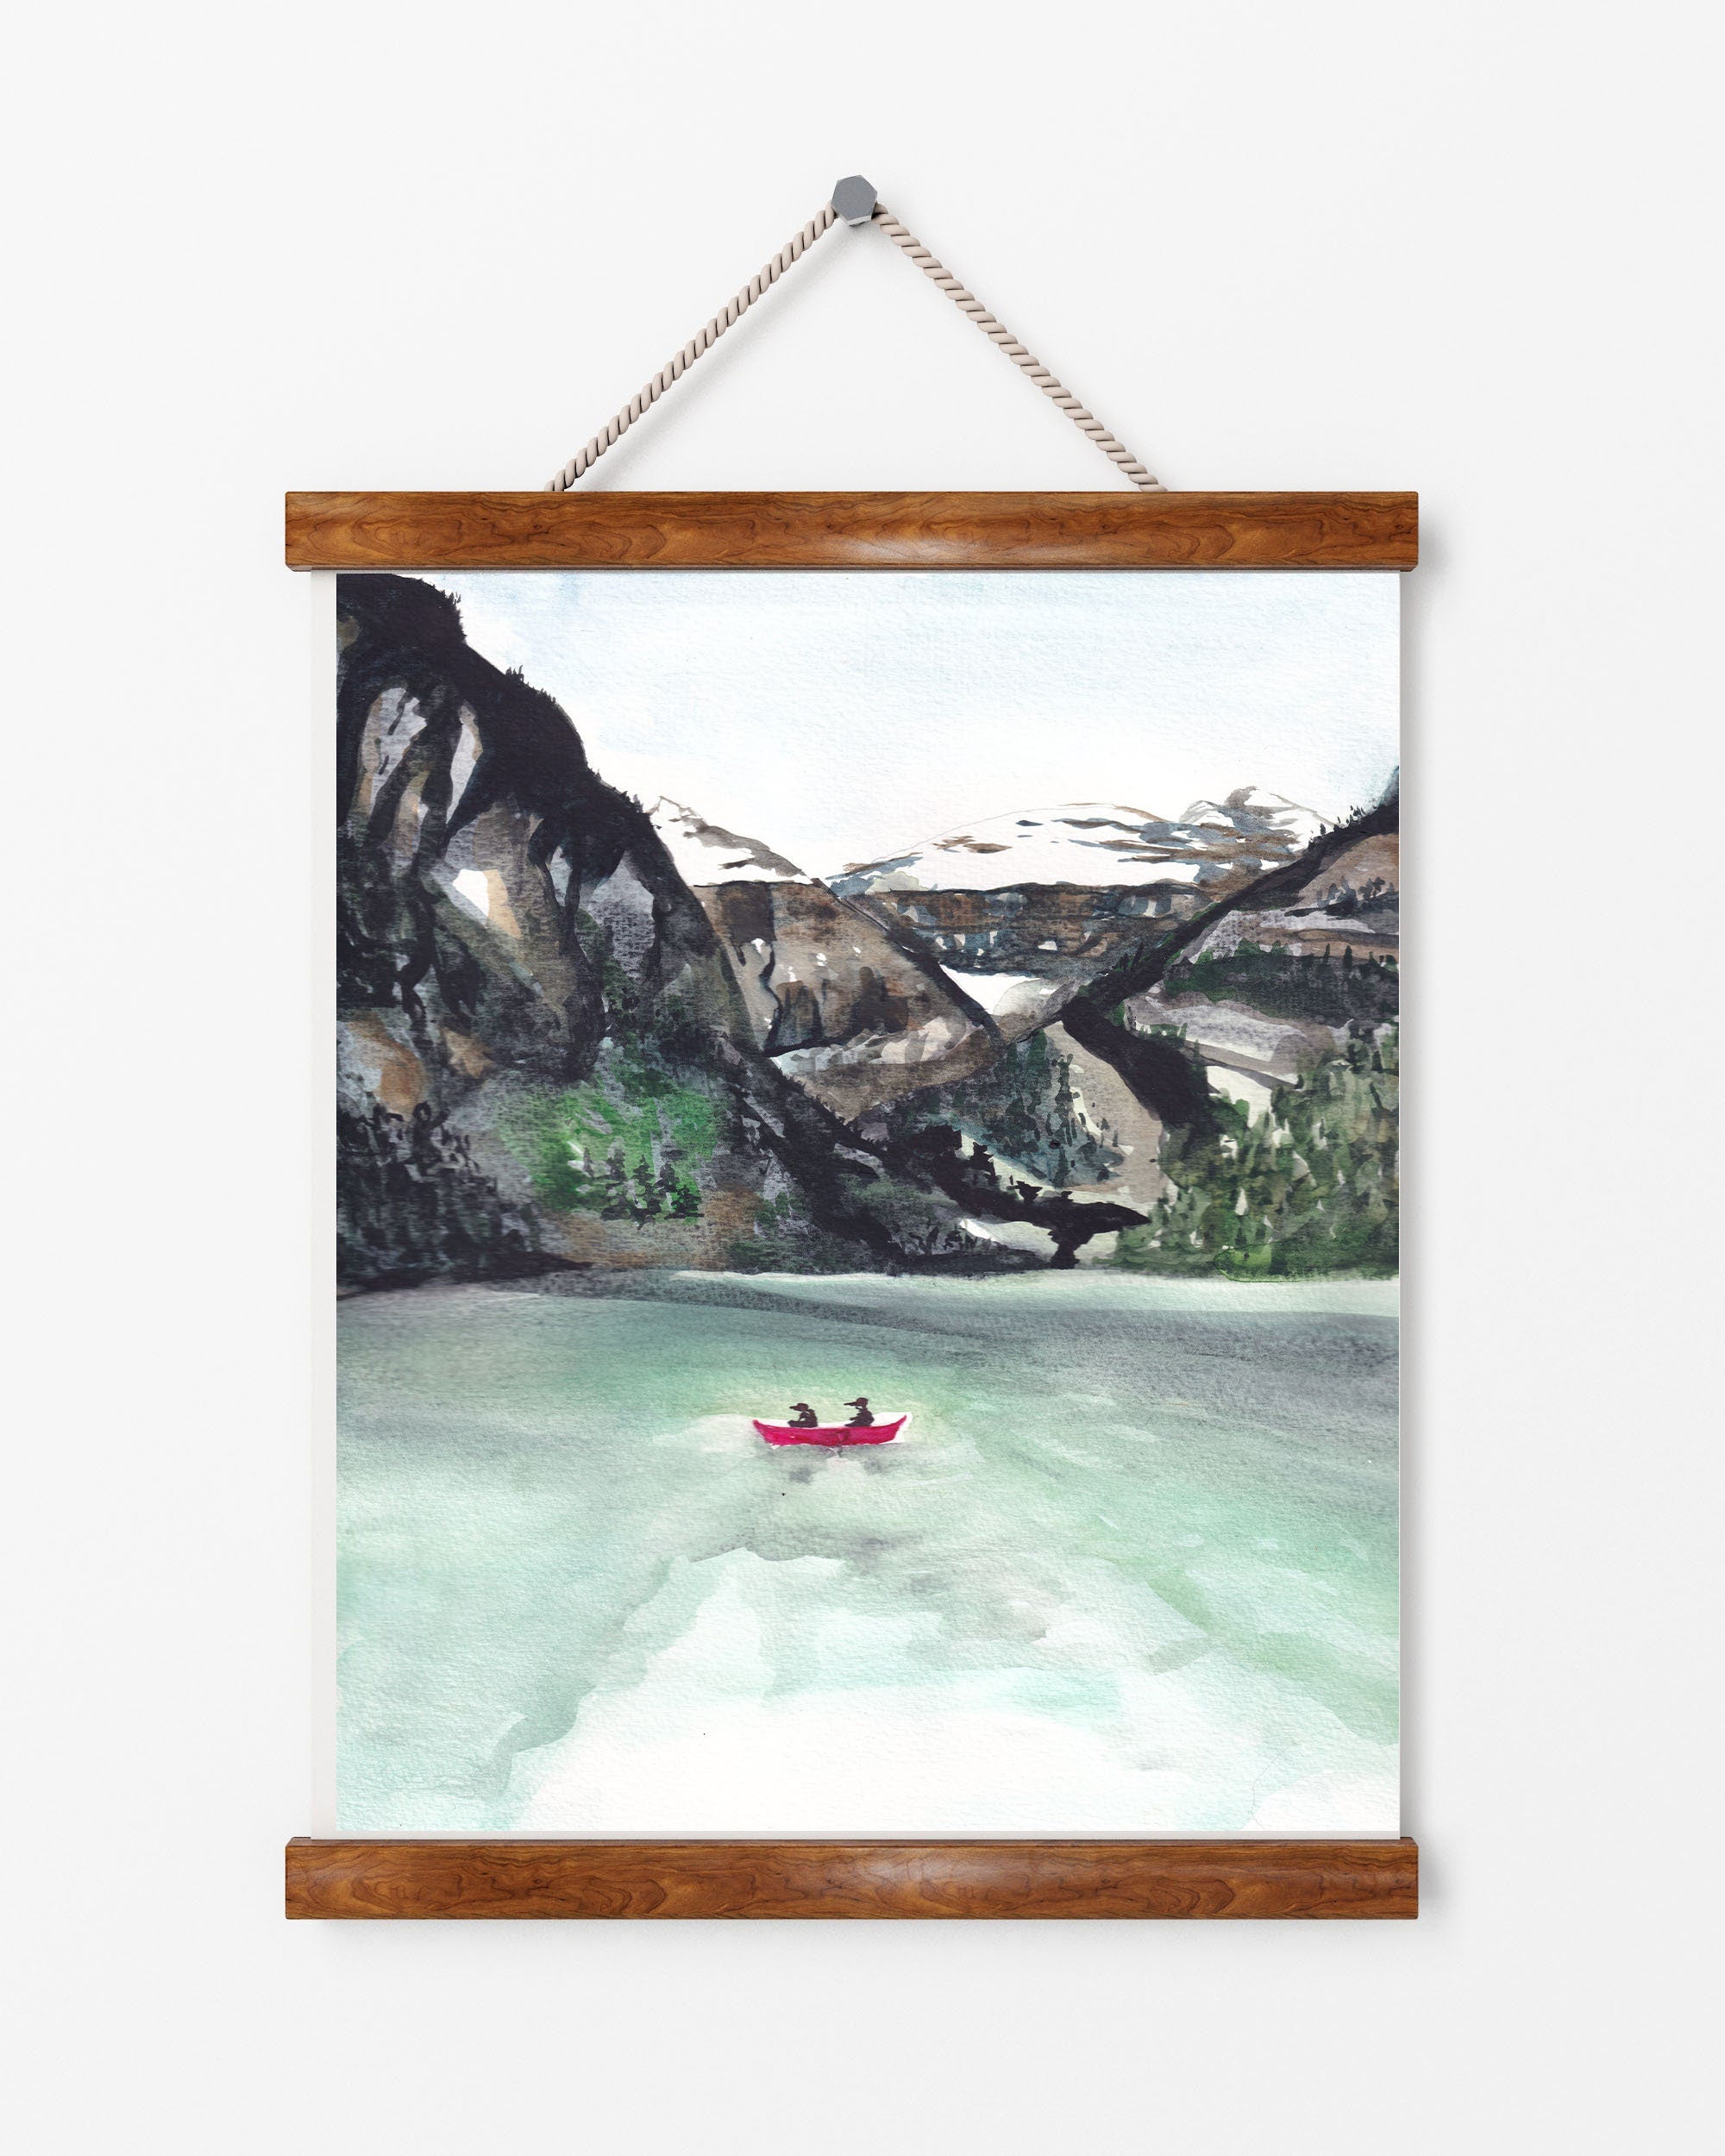 Lake Louise/Banff National Park and Mountains print of painting by Medjool Studio. Print of original gouache painting of the Lake Louise Mountains, including the lake, mountains and a small red boat.